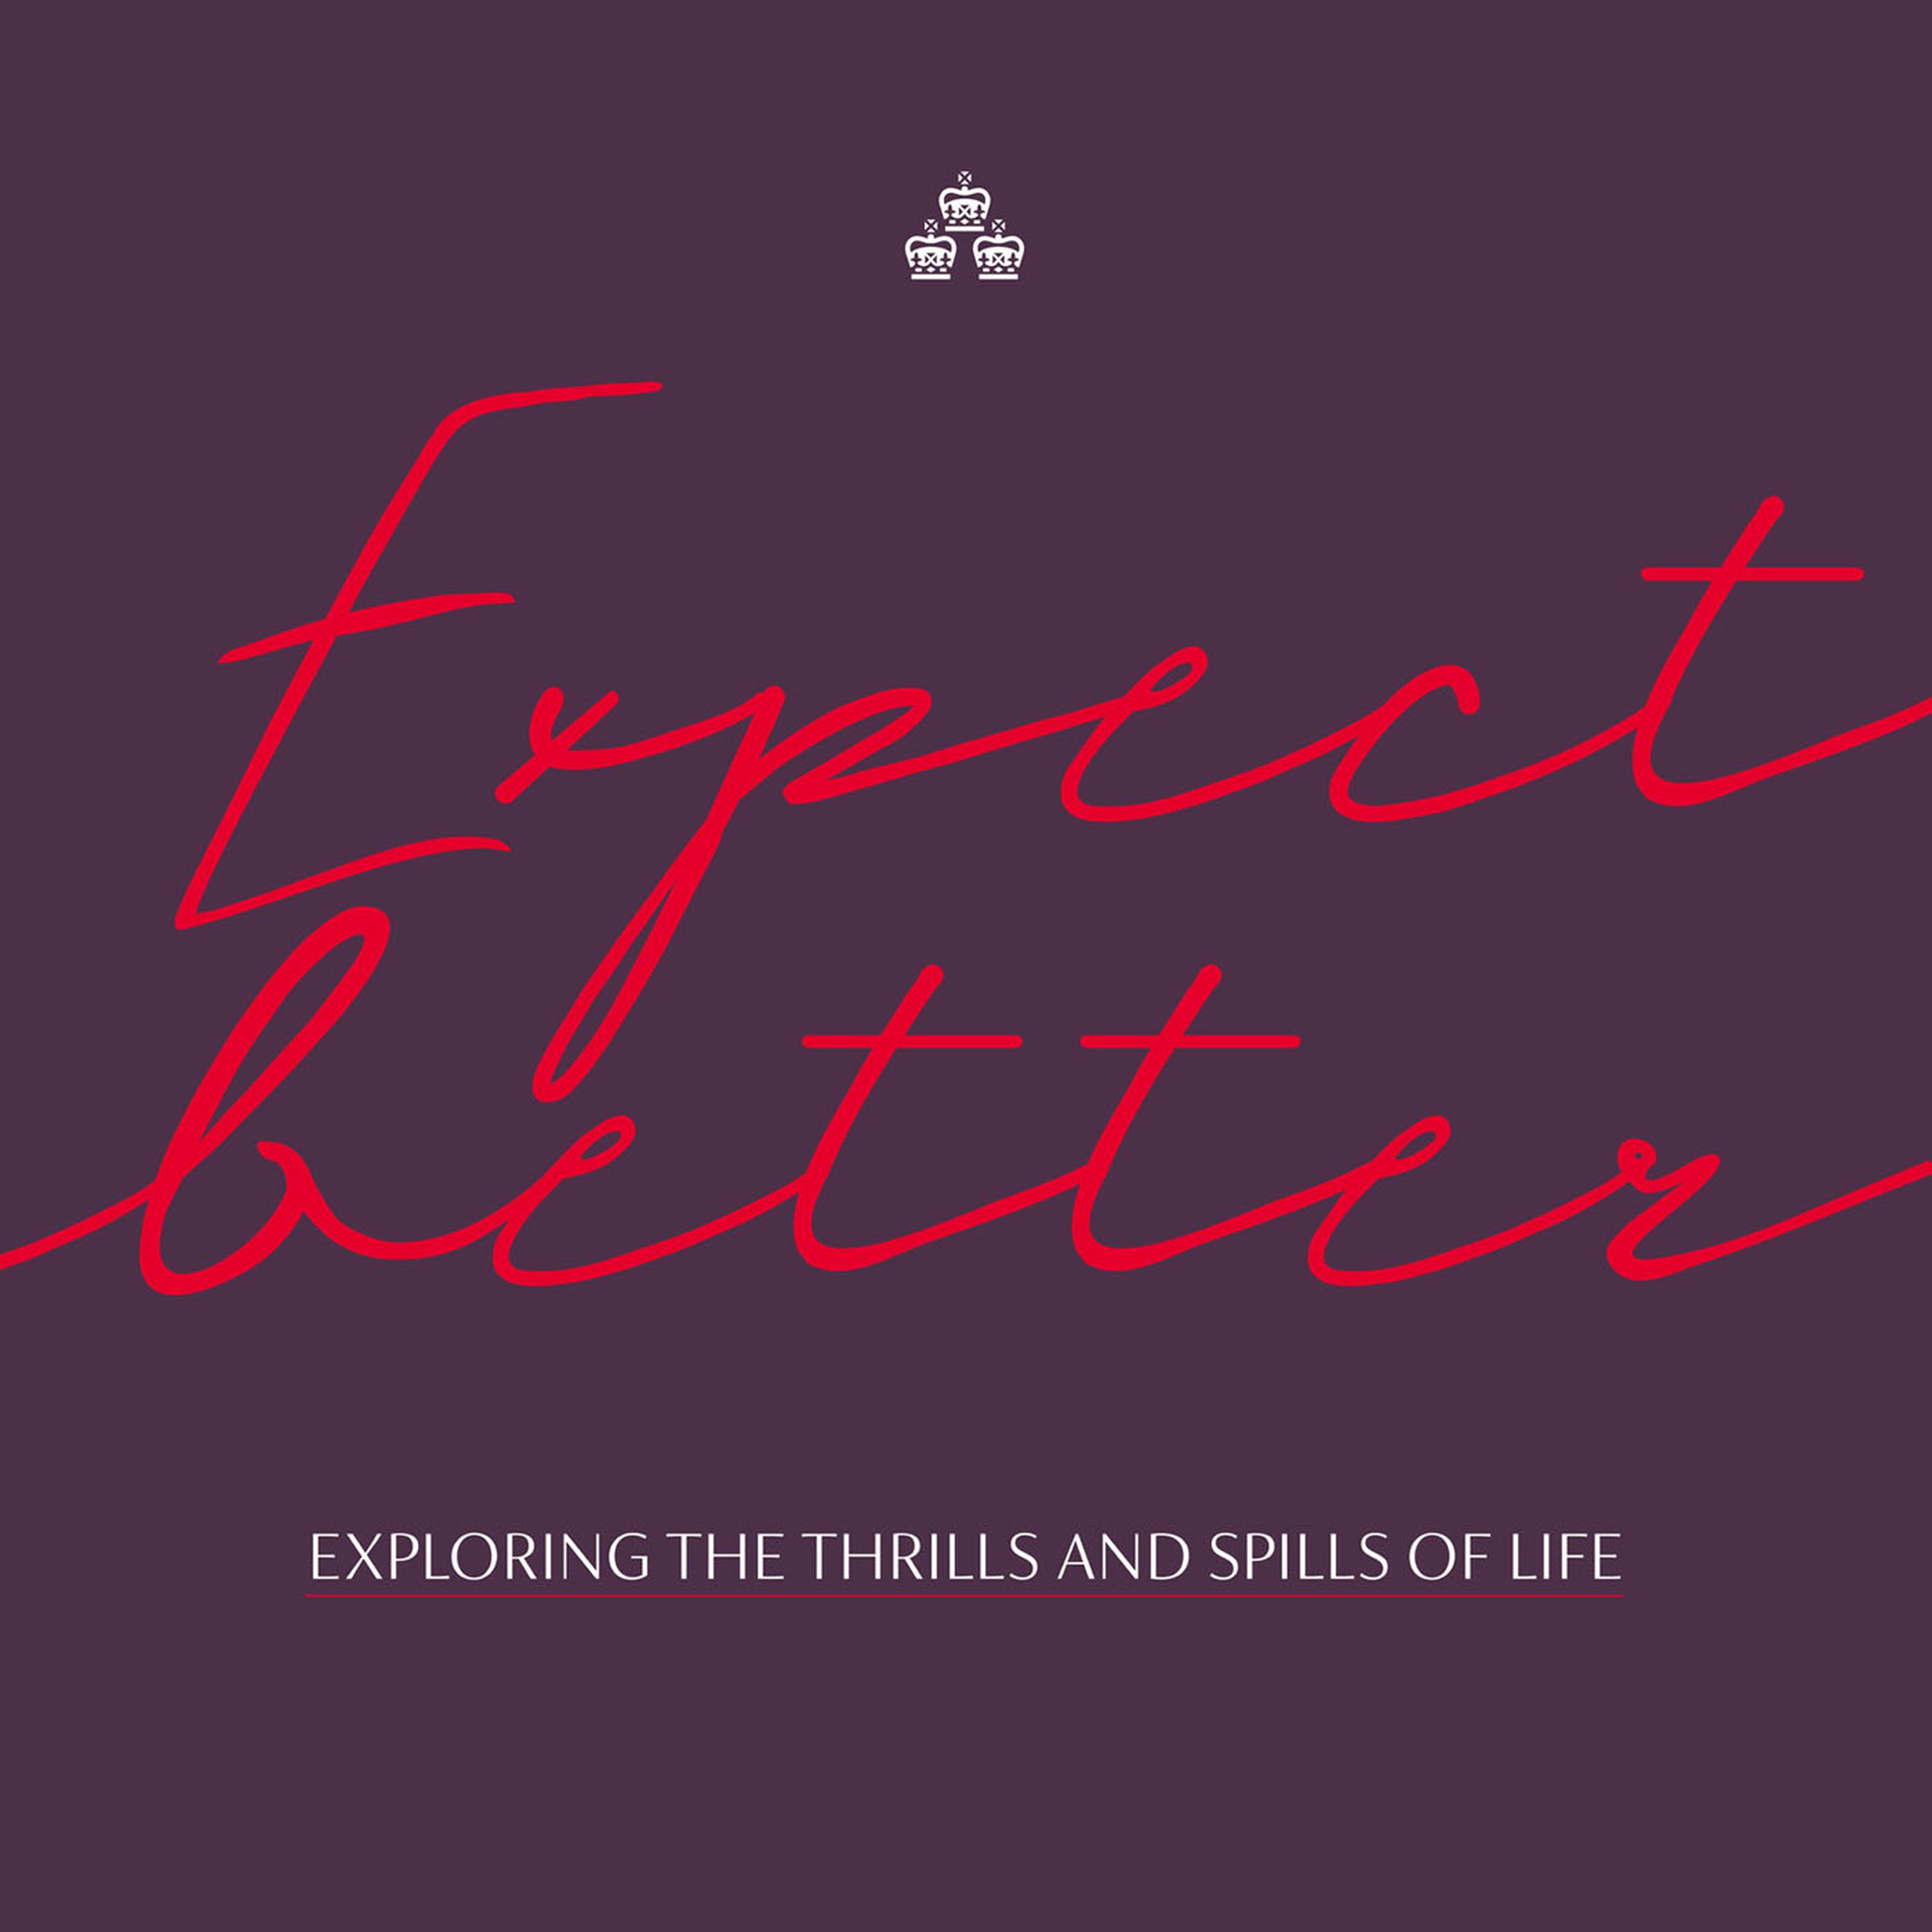 Welcome to Expect Better